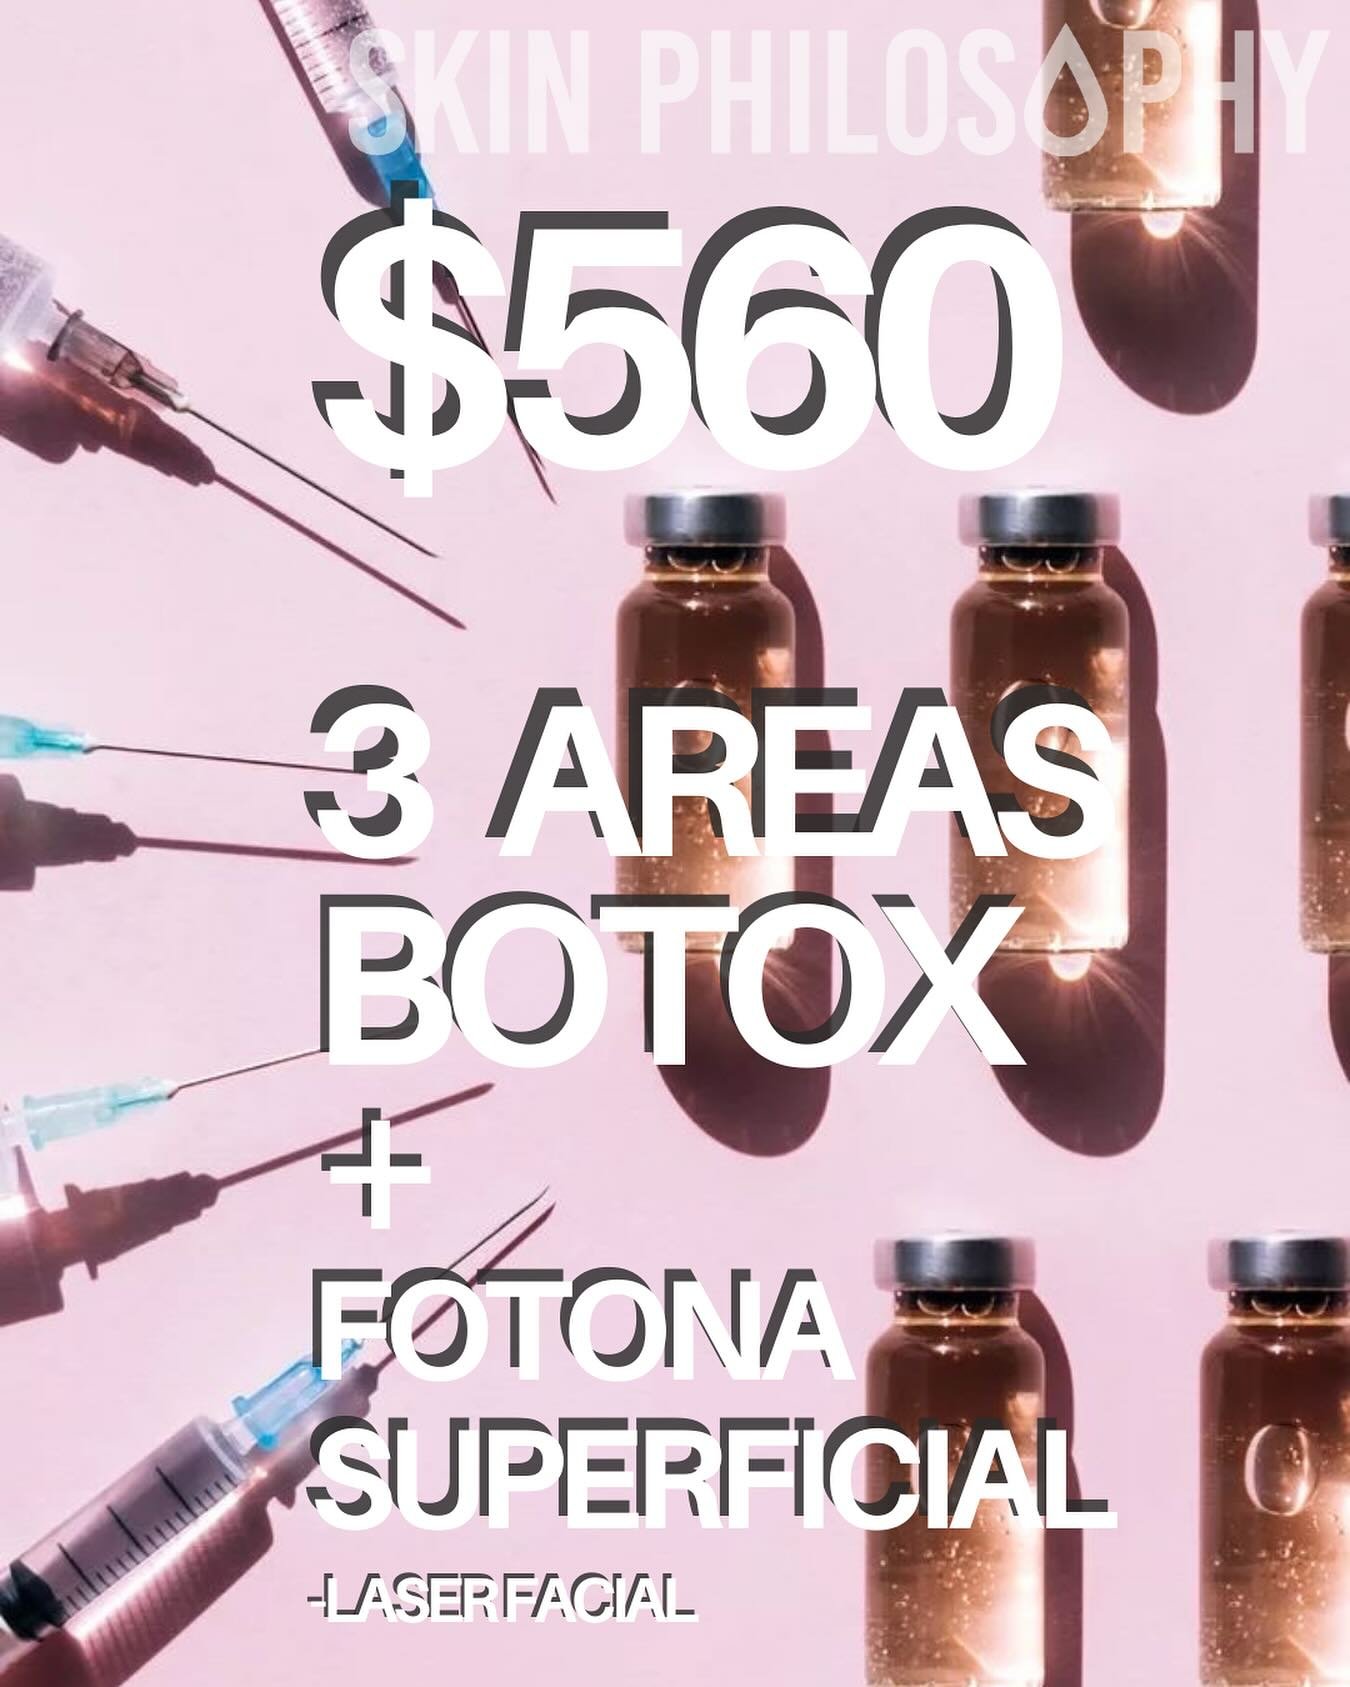 Botox treatment in three FDA-approved areas💫 -frown line, crow&rsquo;s feet  and forehead lines💉💦 ➕  Fotona superficial laser⚡ to rejuvenat fine lines and wrinkles👀 , originally valued at $1150 Now $560!!
Make Appointment: skinphilosophylic.com

